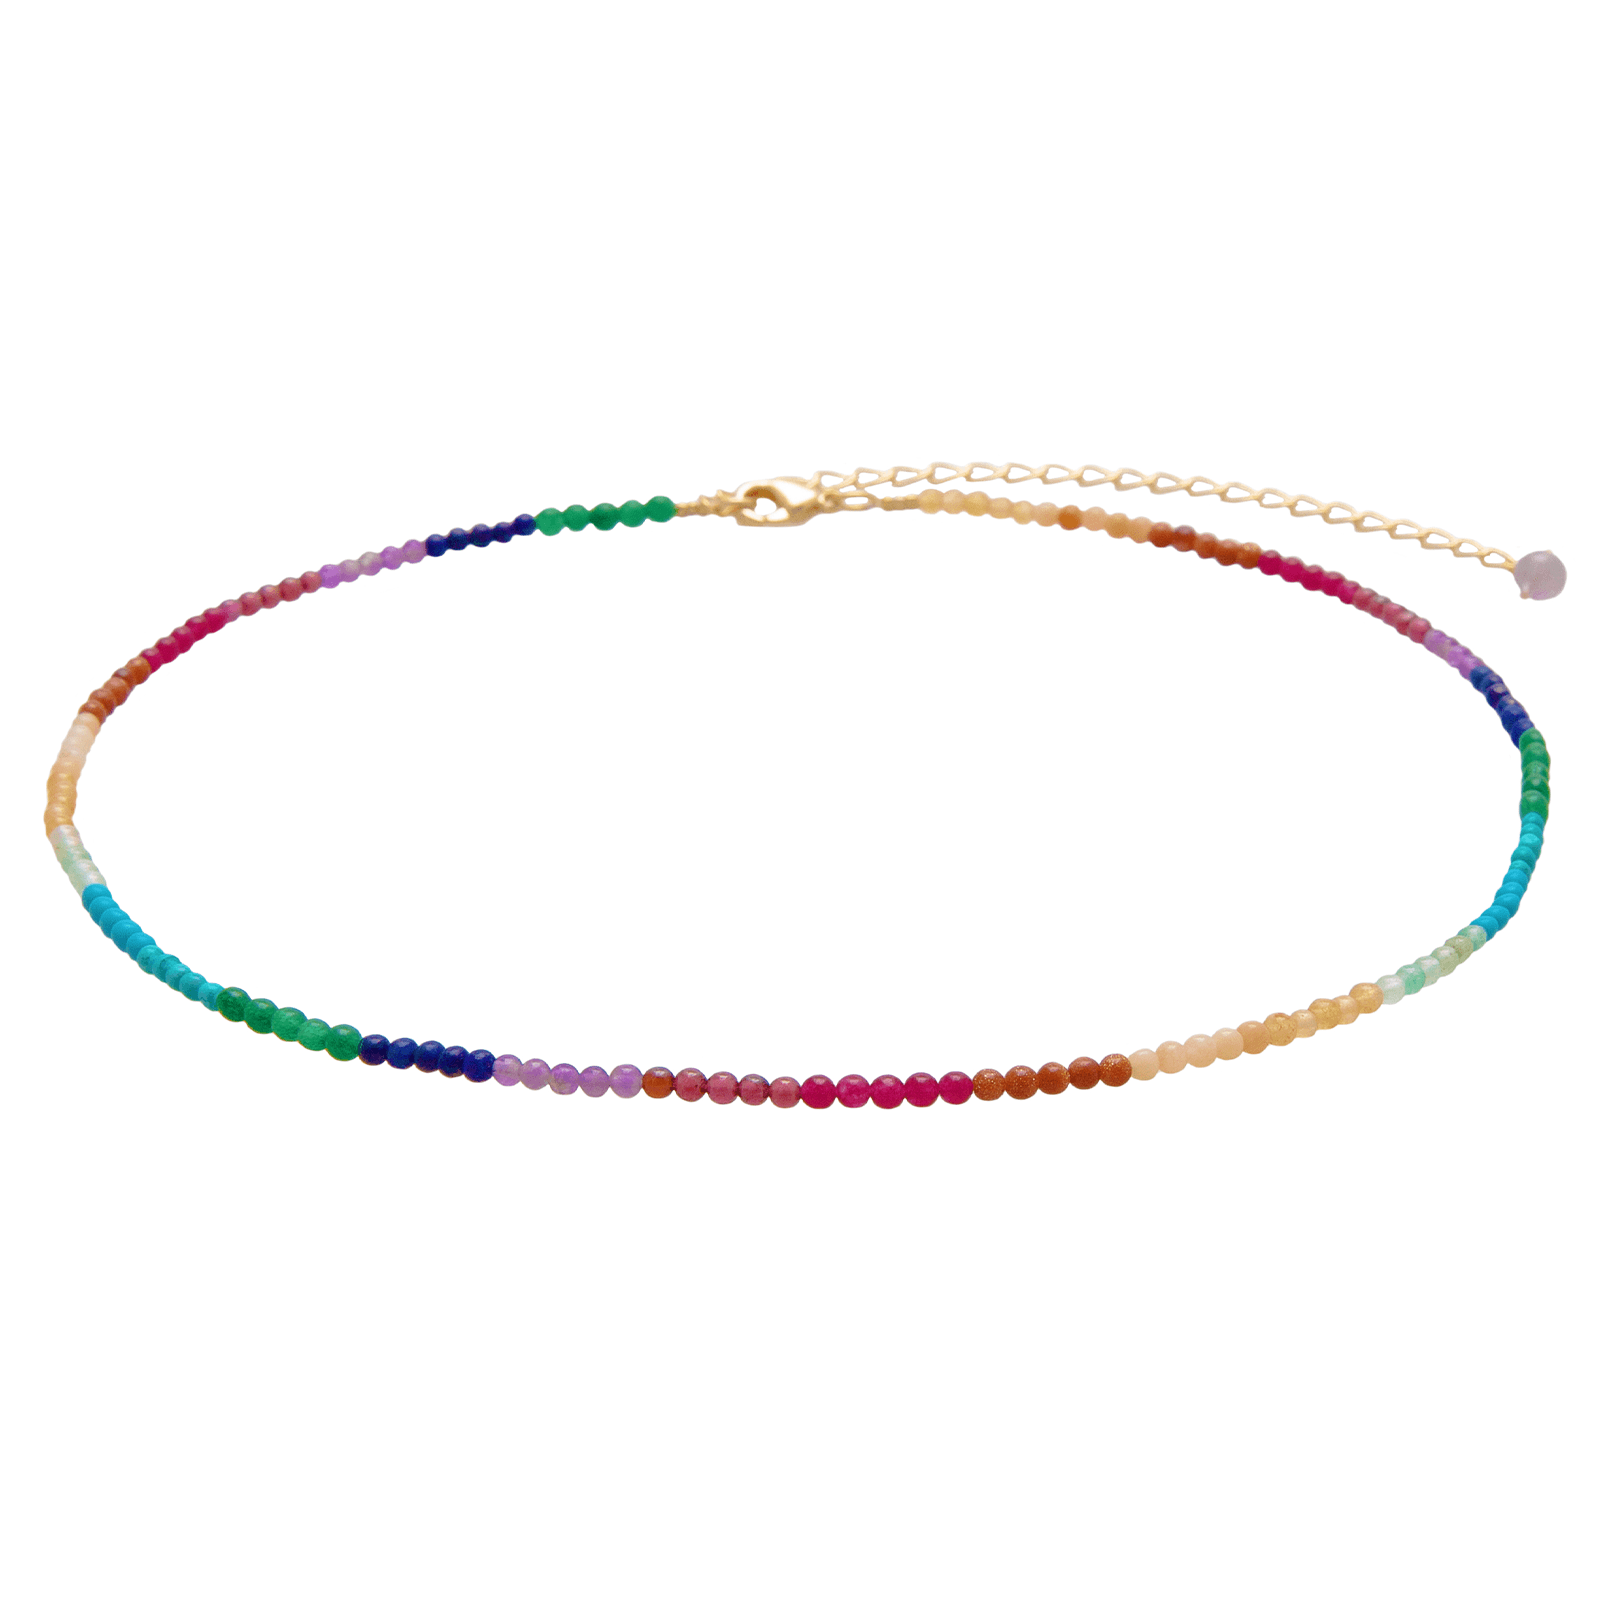 Gold Chain Necklace with an assortment of rainbow colored beads